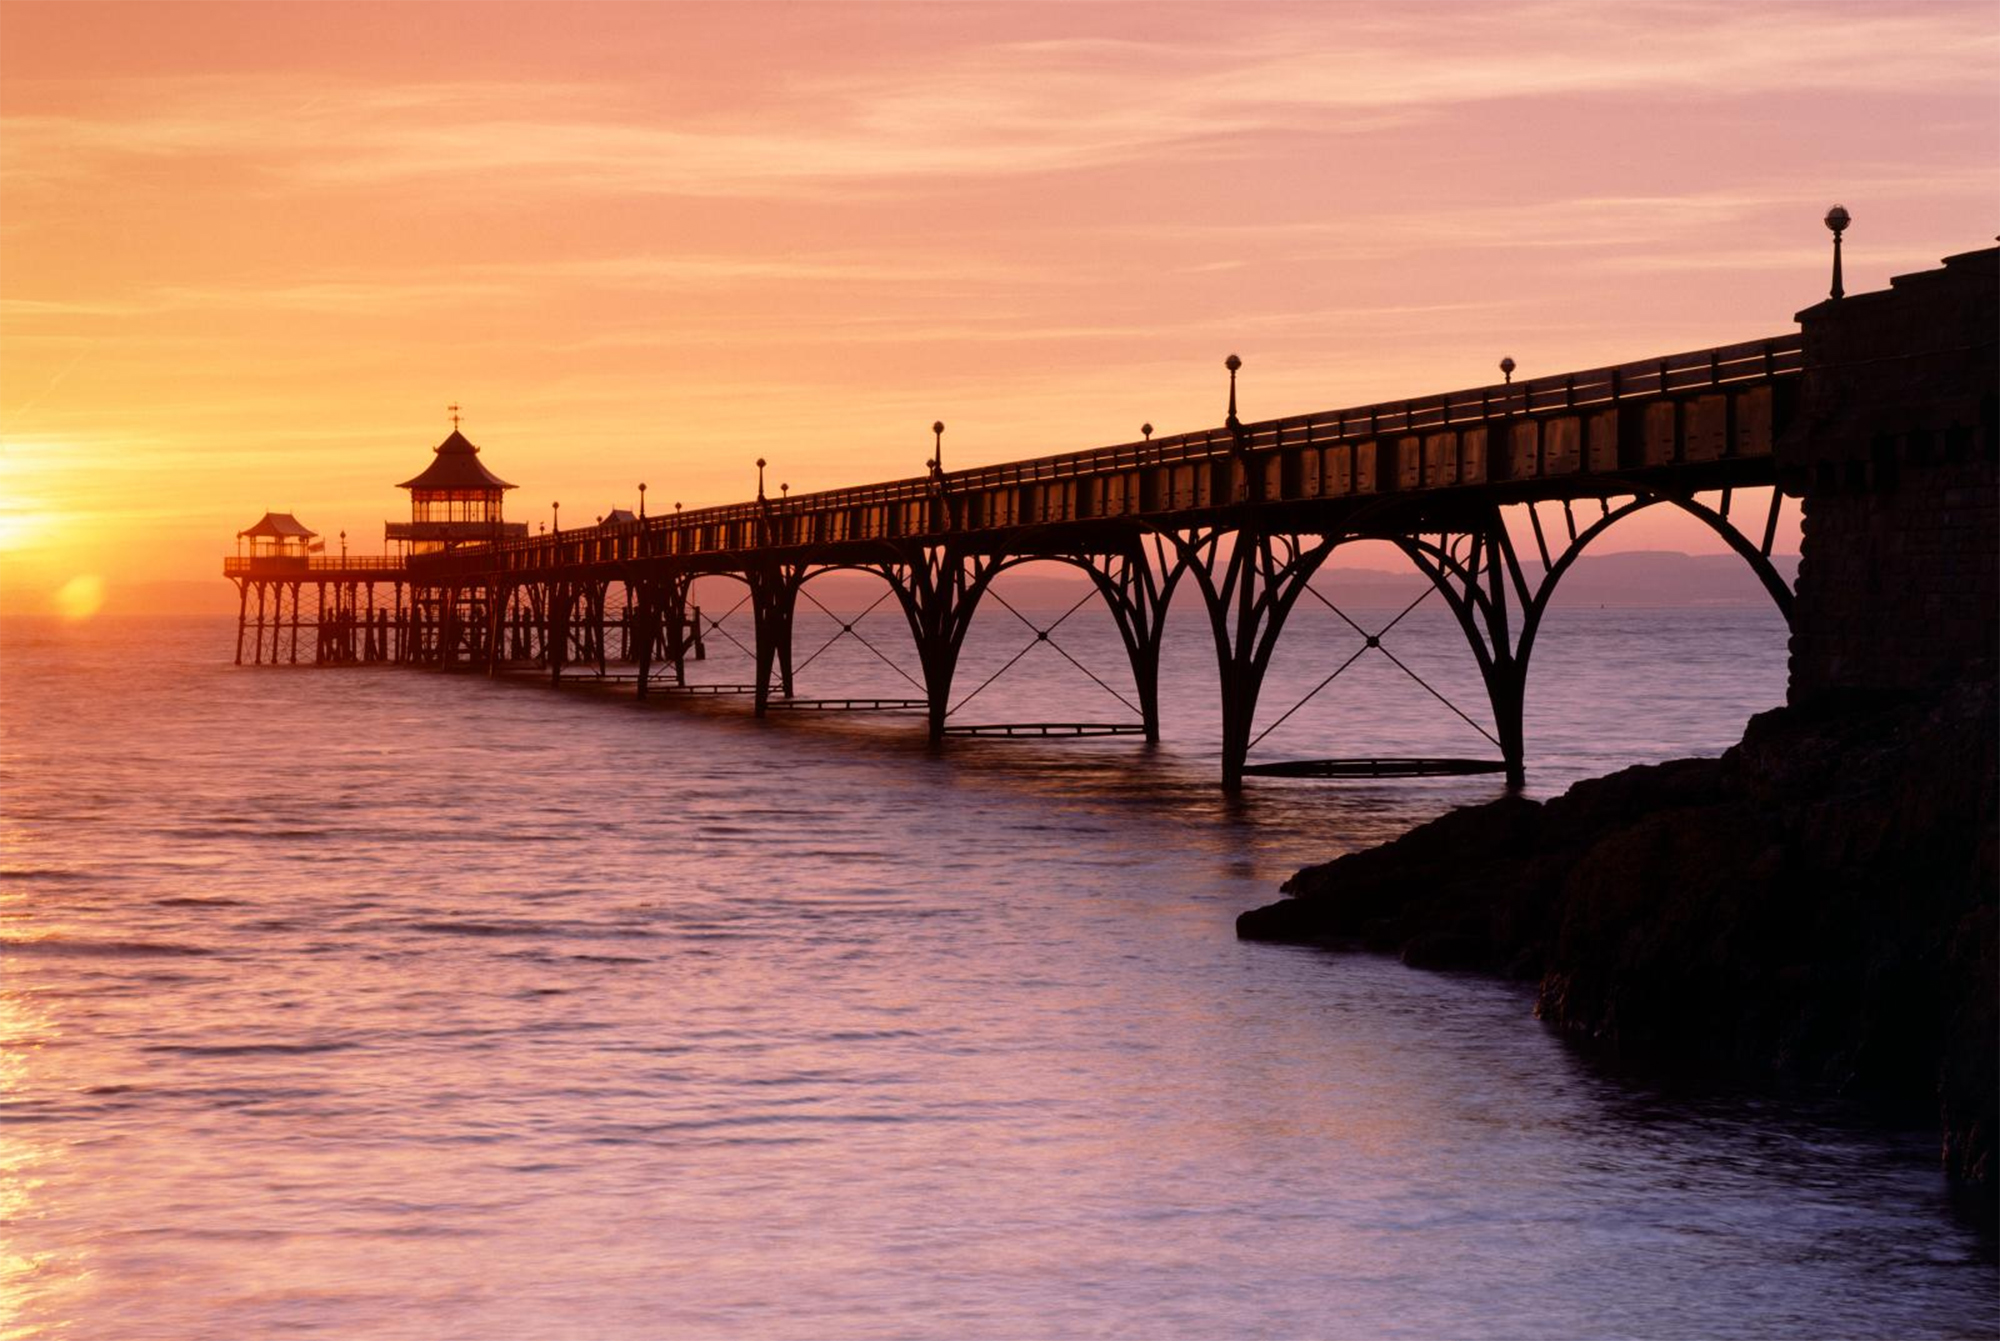 A view of Clevedon pier at sunset.